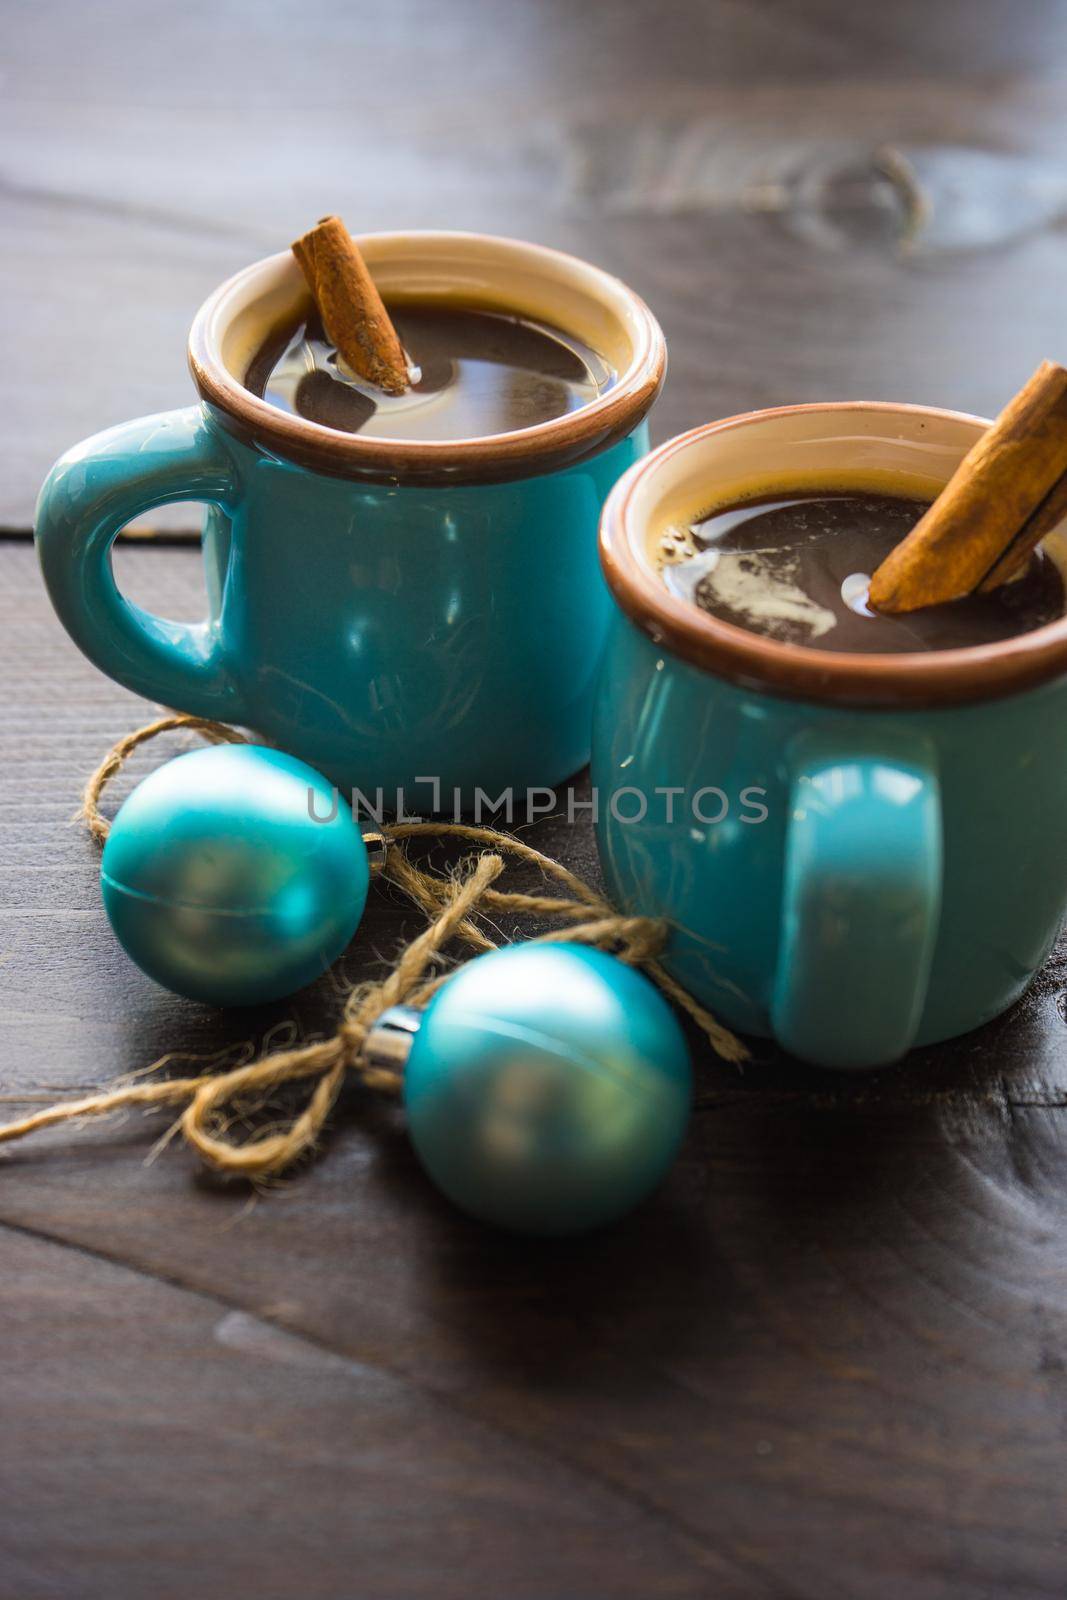 Mug of coffee with spices - cinnamon sticks and anise star with Christmas decor on dark wooden table with copyspace